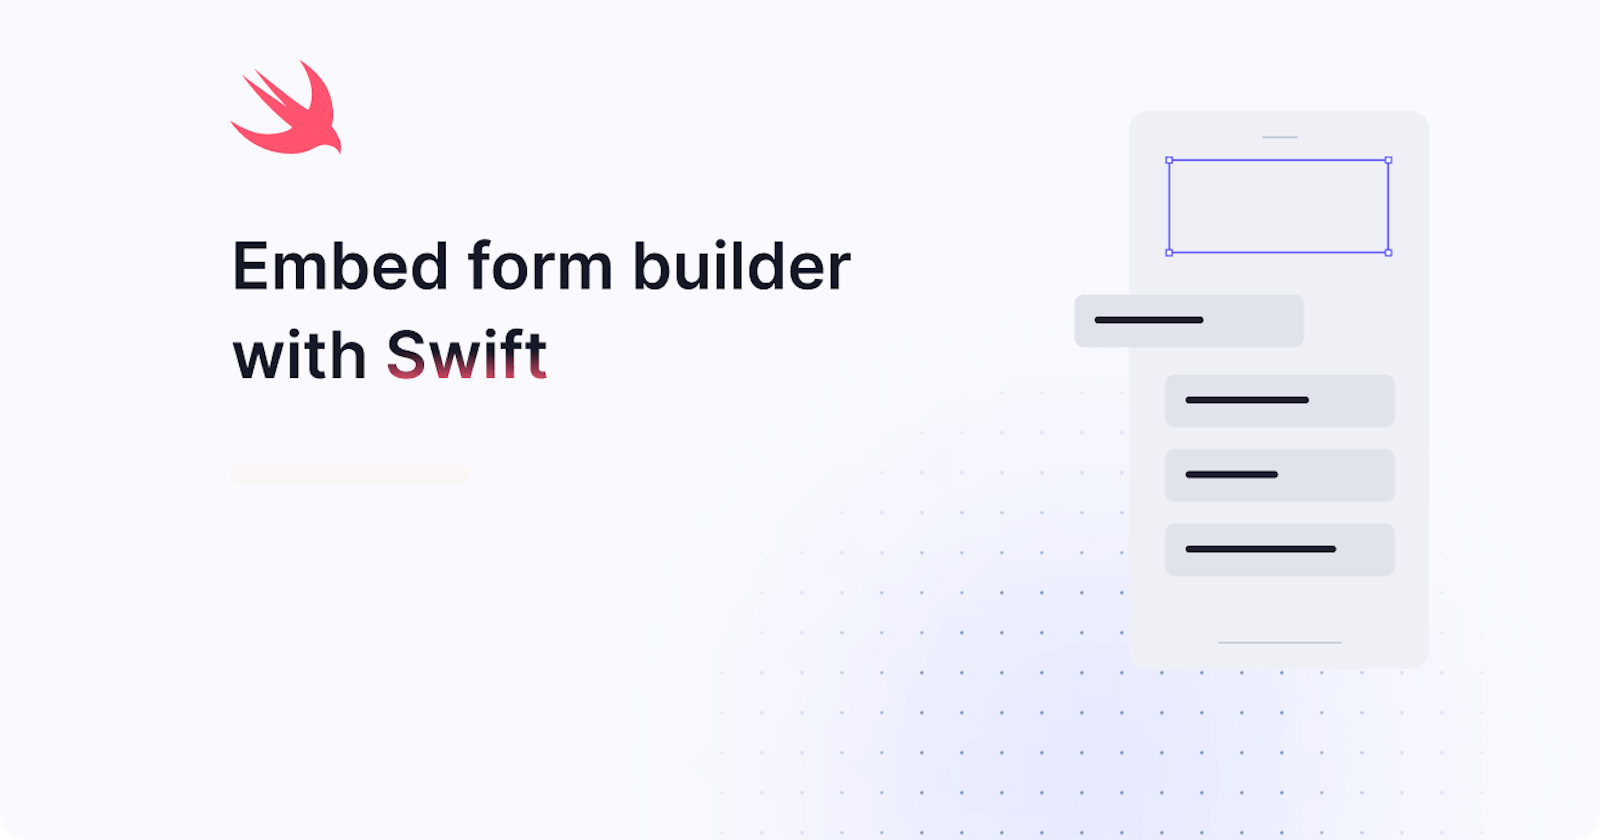 Embed a form builder with Swift